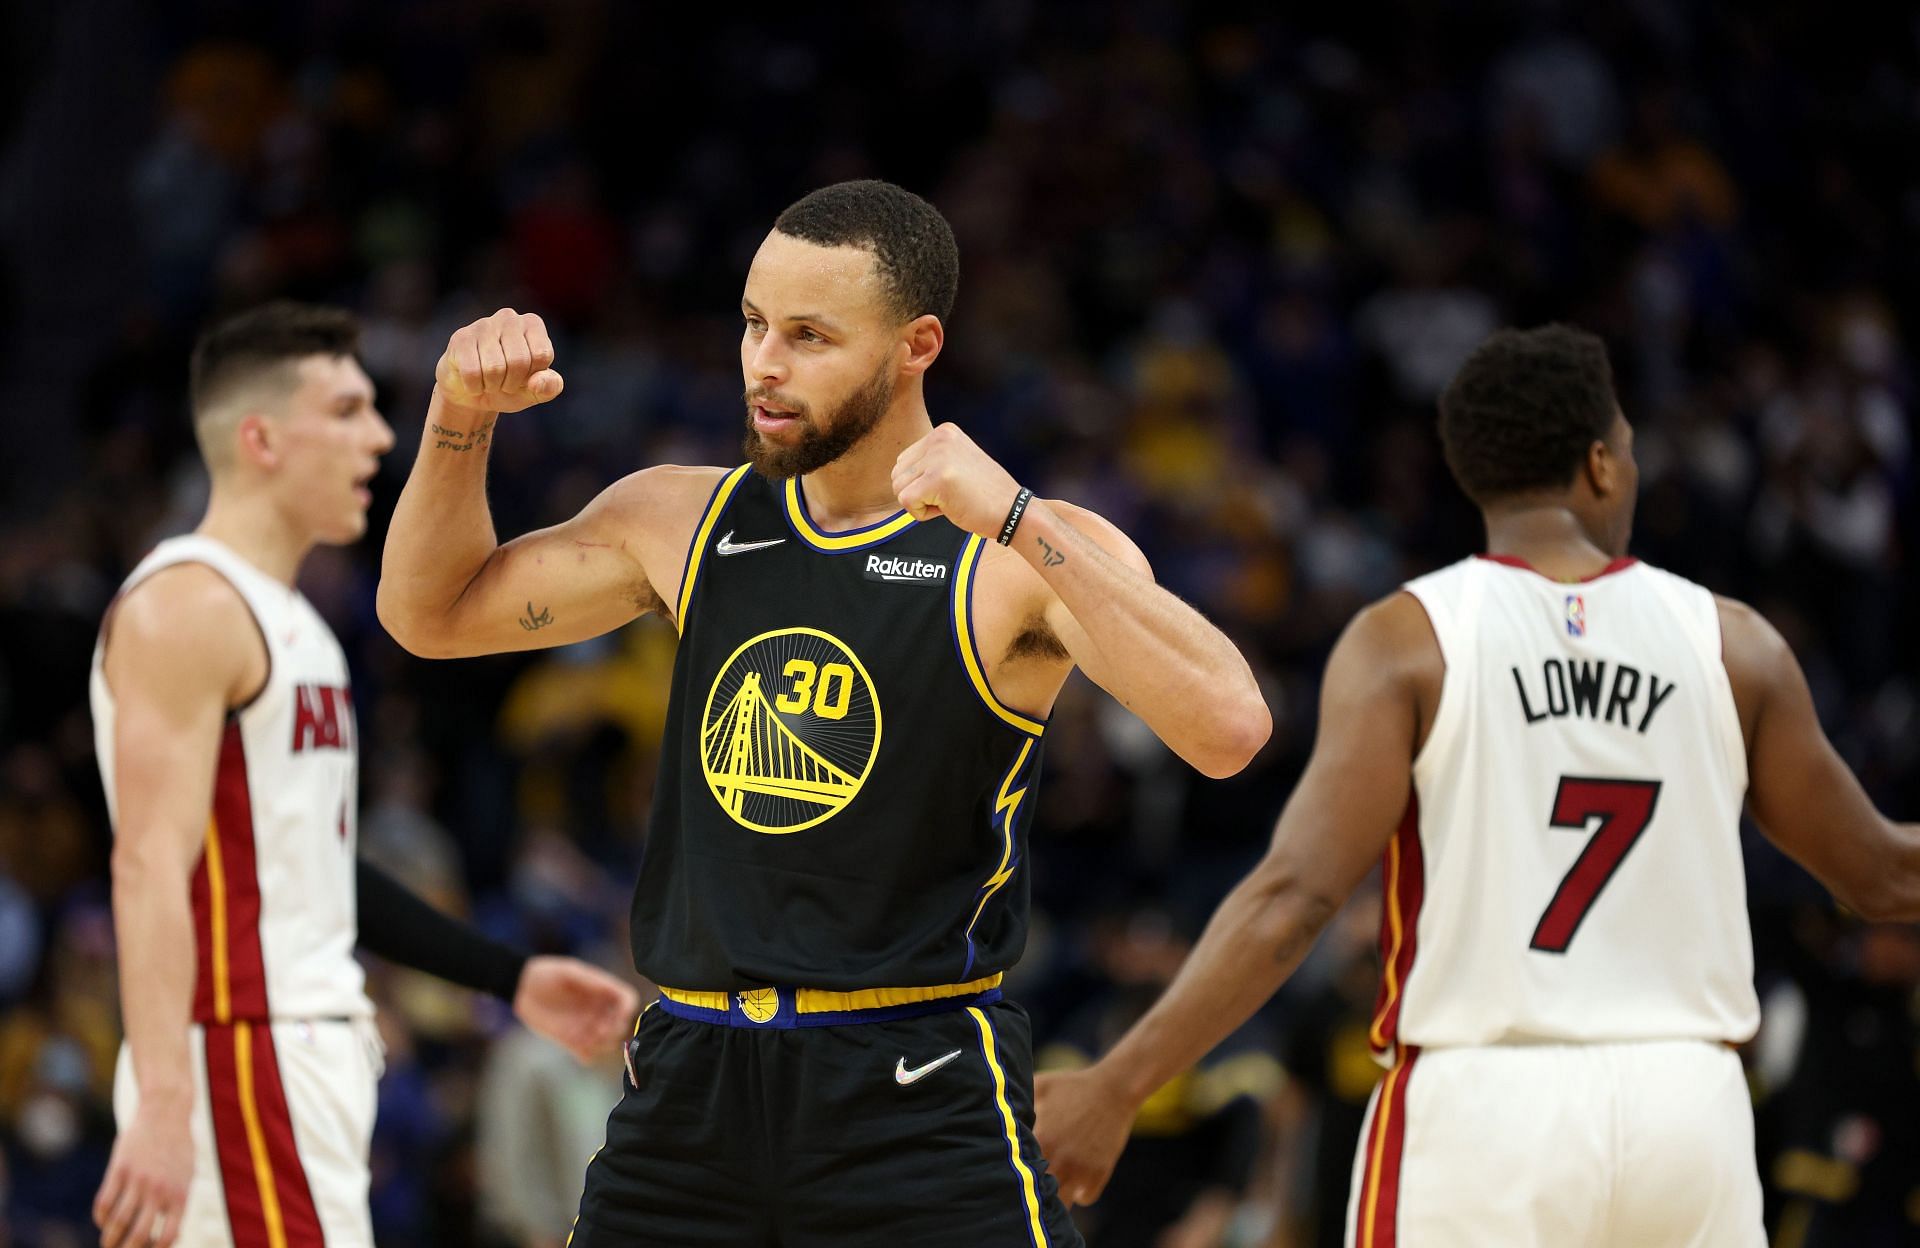 Golden State Warriors superstar Stephen Curry has been impressive this year